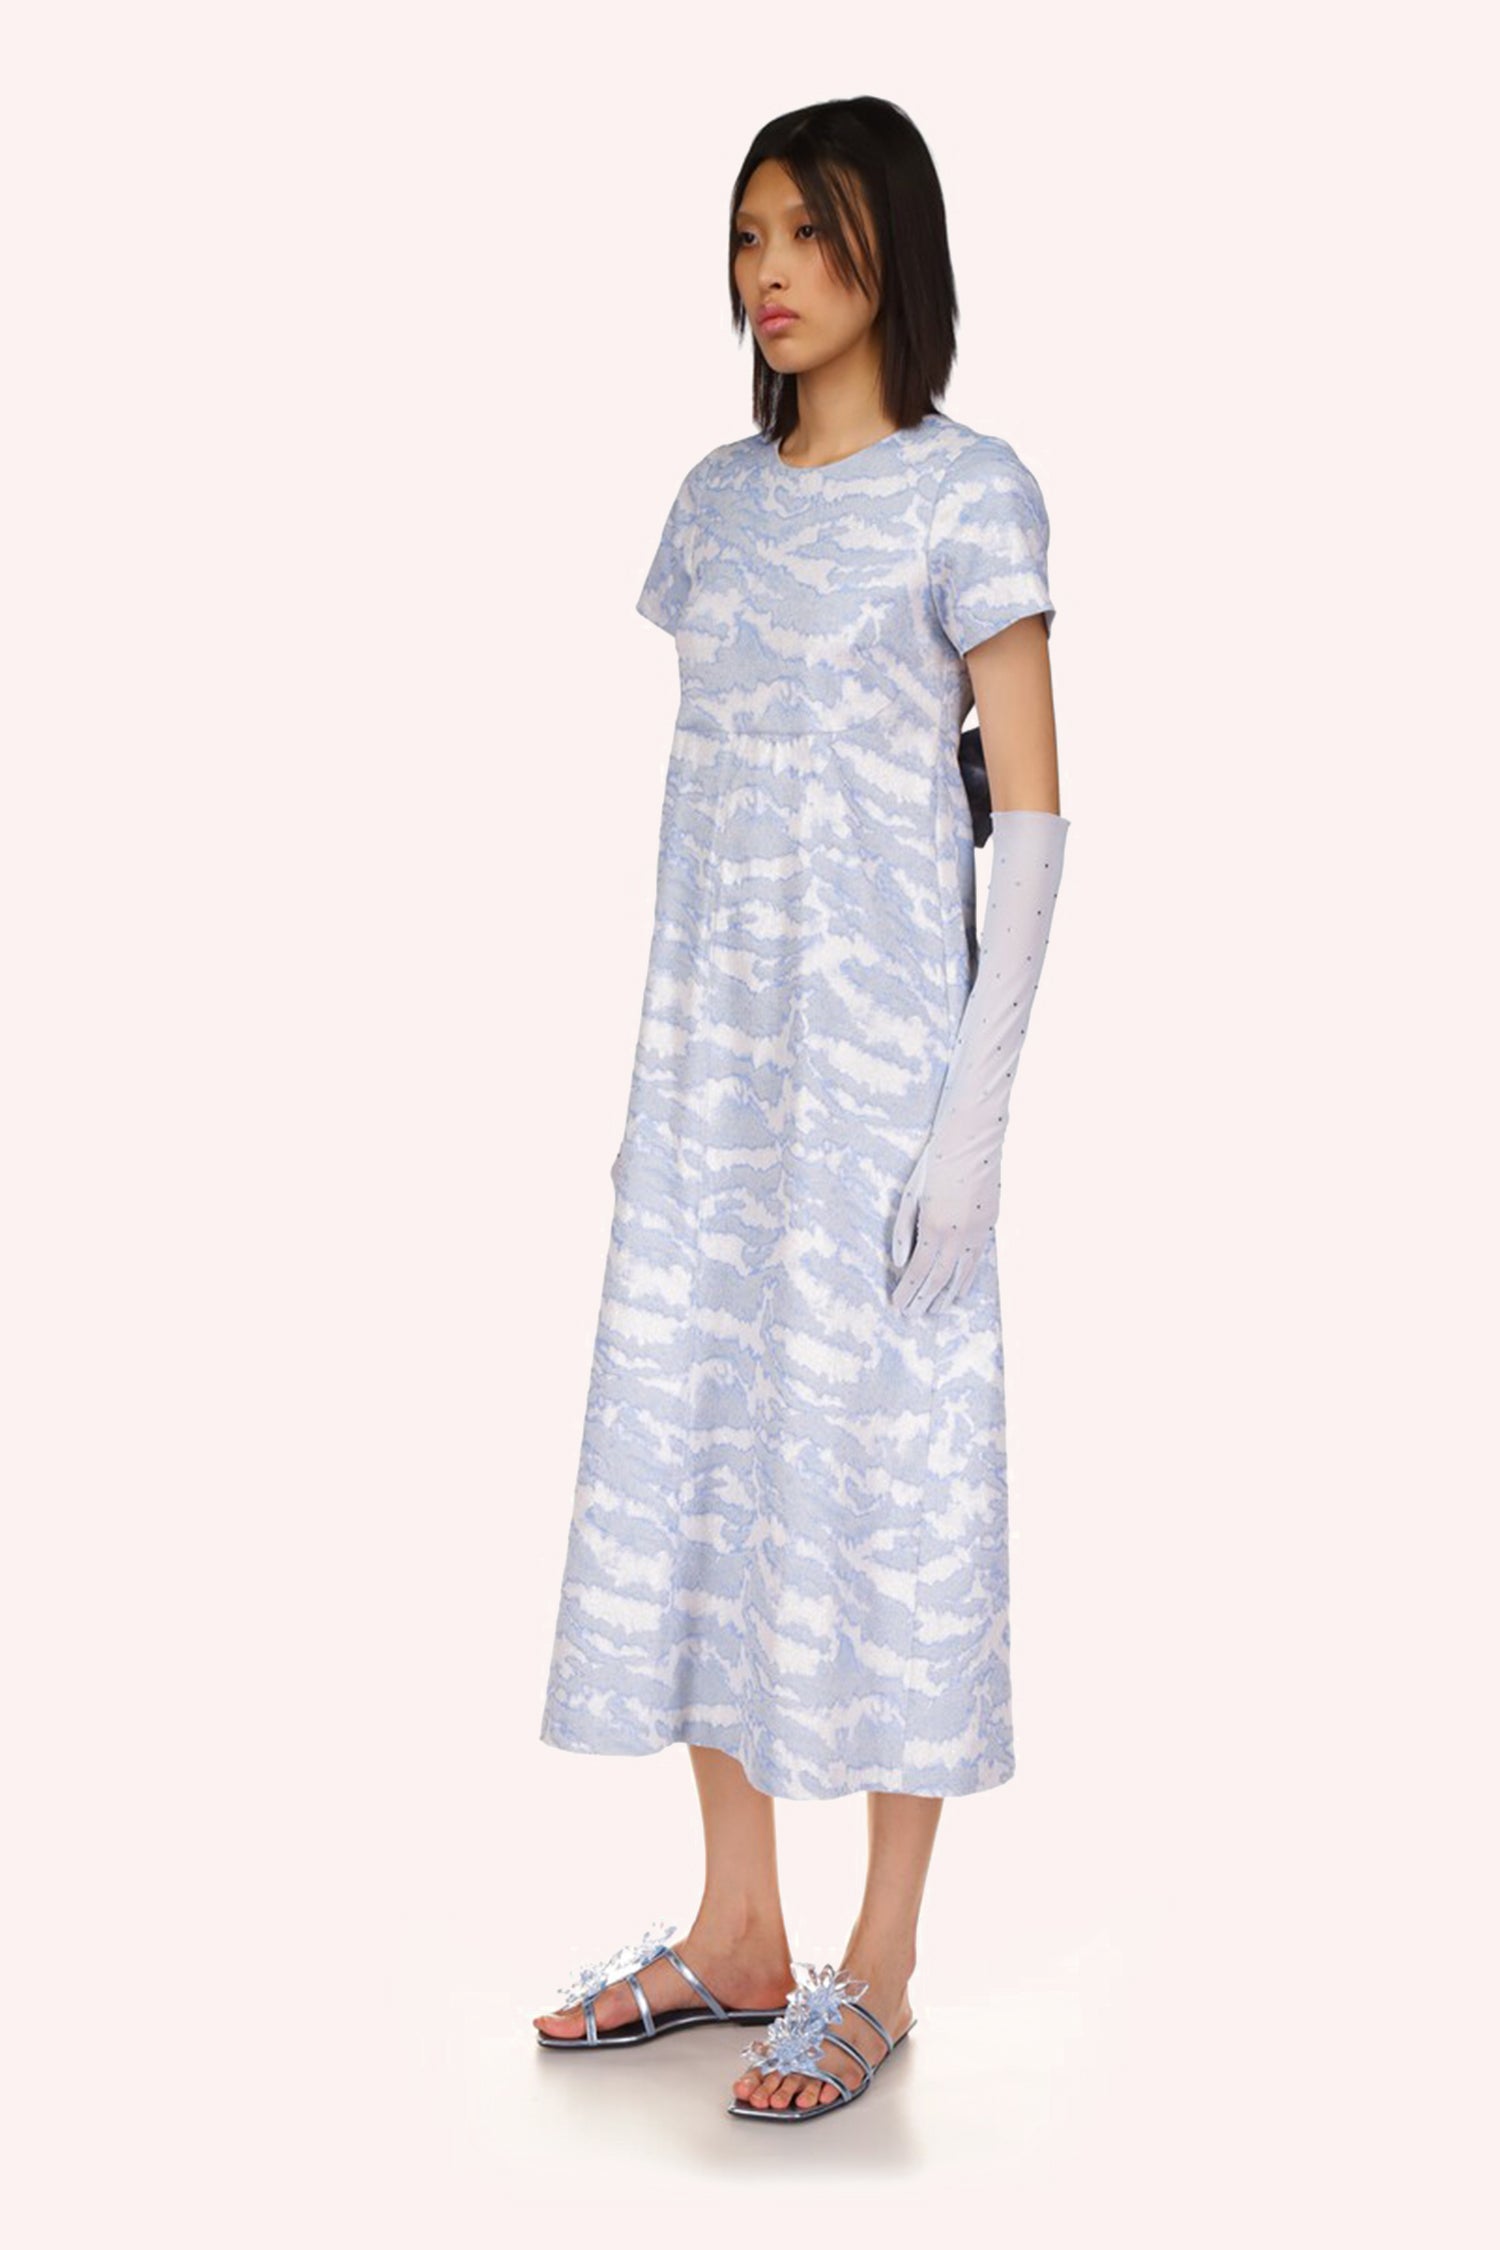 Sauvage Jacquard Dress Powder Blue, dotted with light blue clouds on a Powder Blue